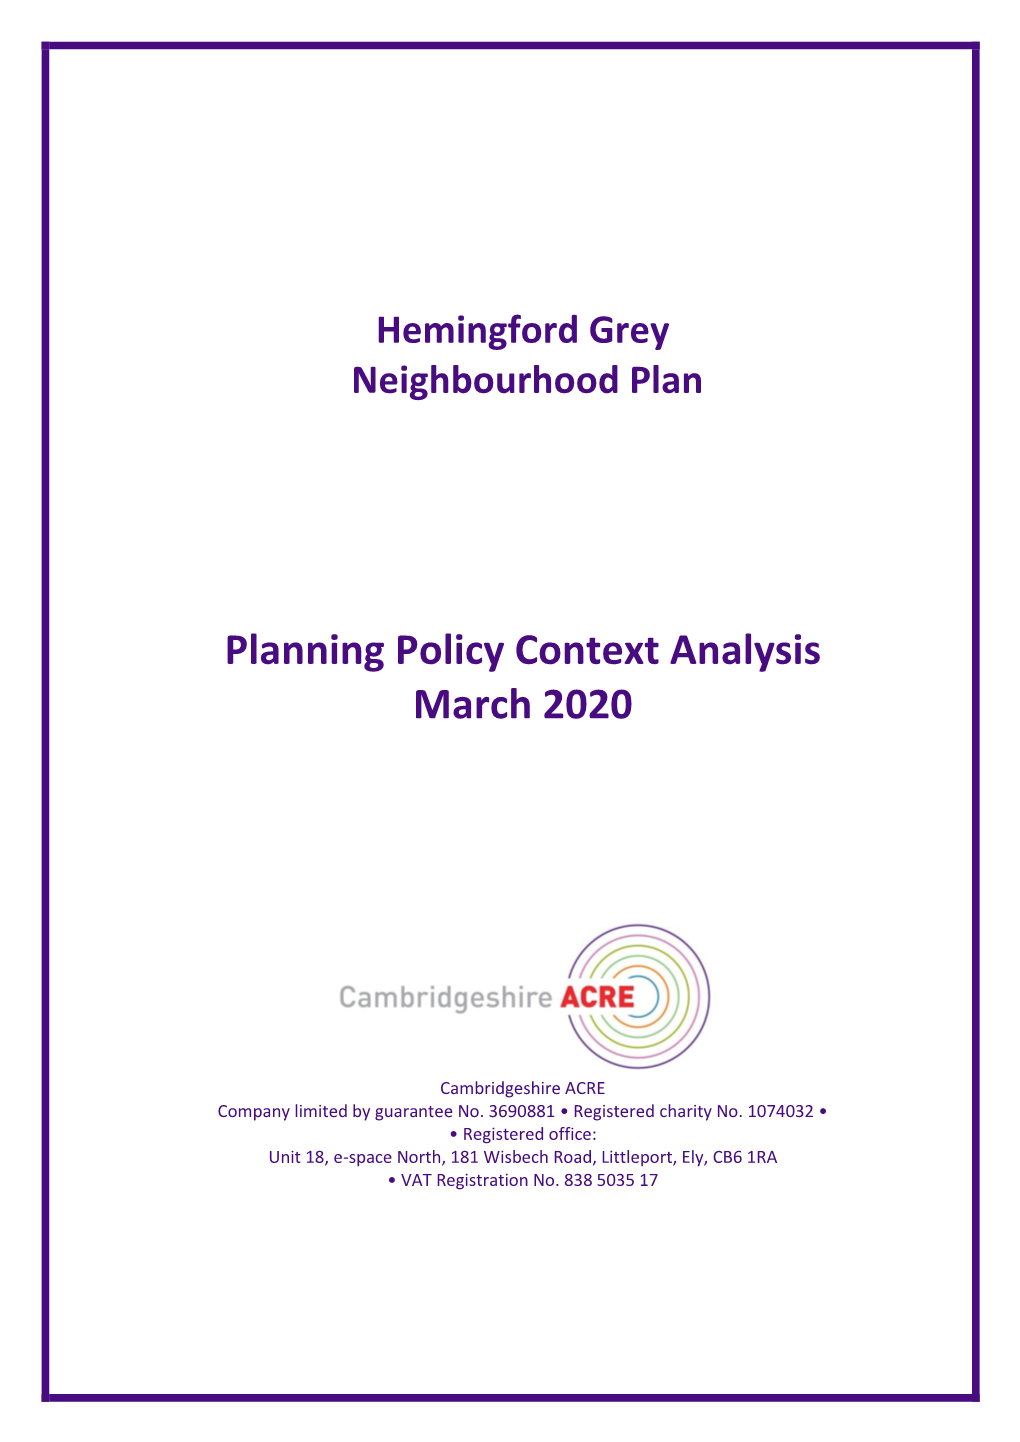 Planning Policy Context Analysis March 2020